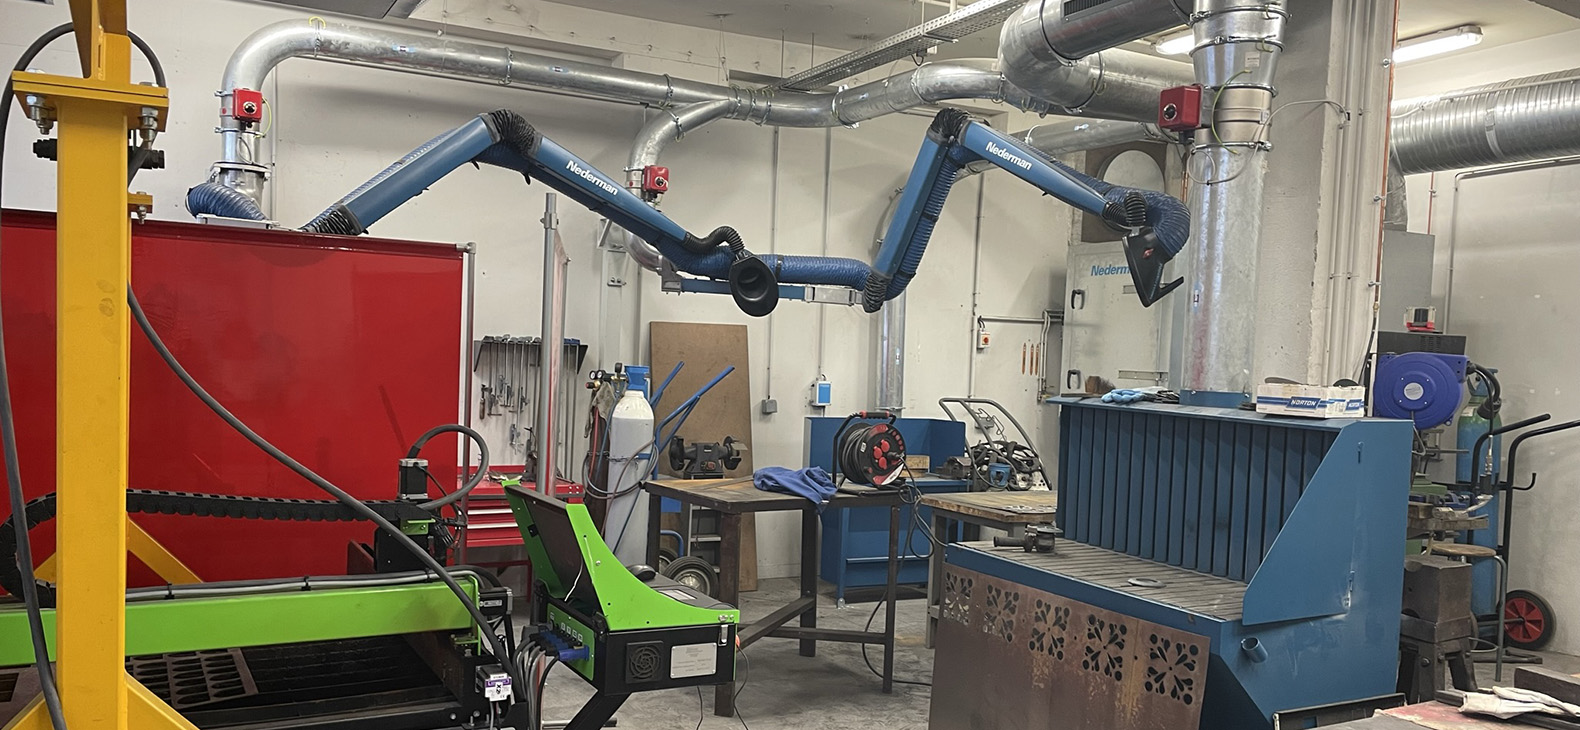 Residency Program Schafhof / District of Upper Bavaria: Focus /> Orléans; Image: Partial view of one of the workrooms on site in Orléans; machines and workbenches can be seen.